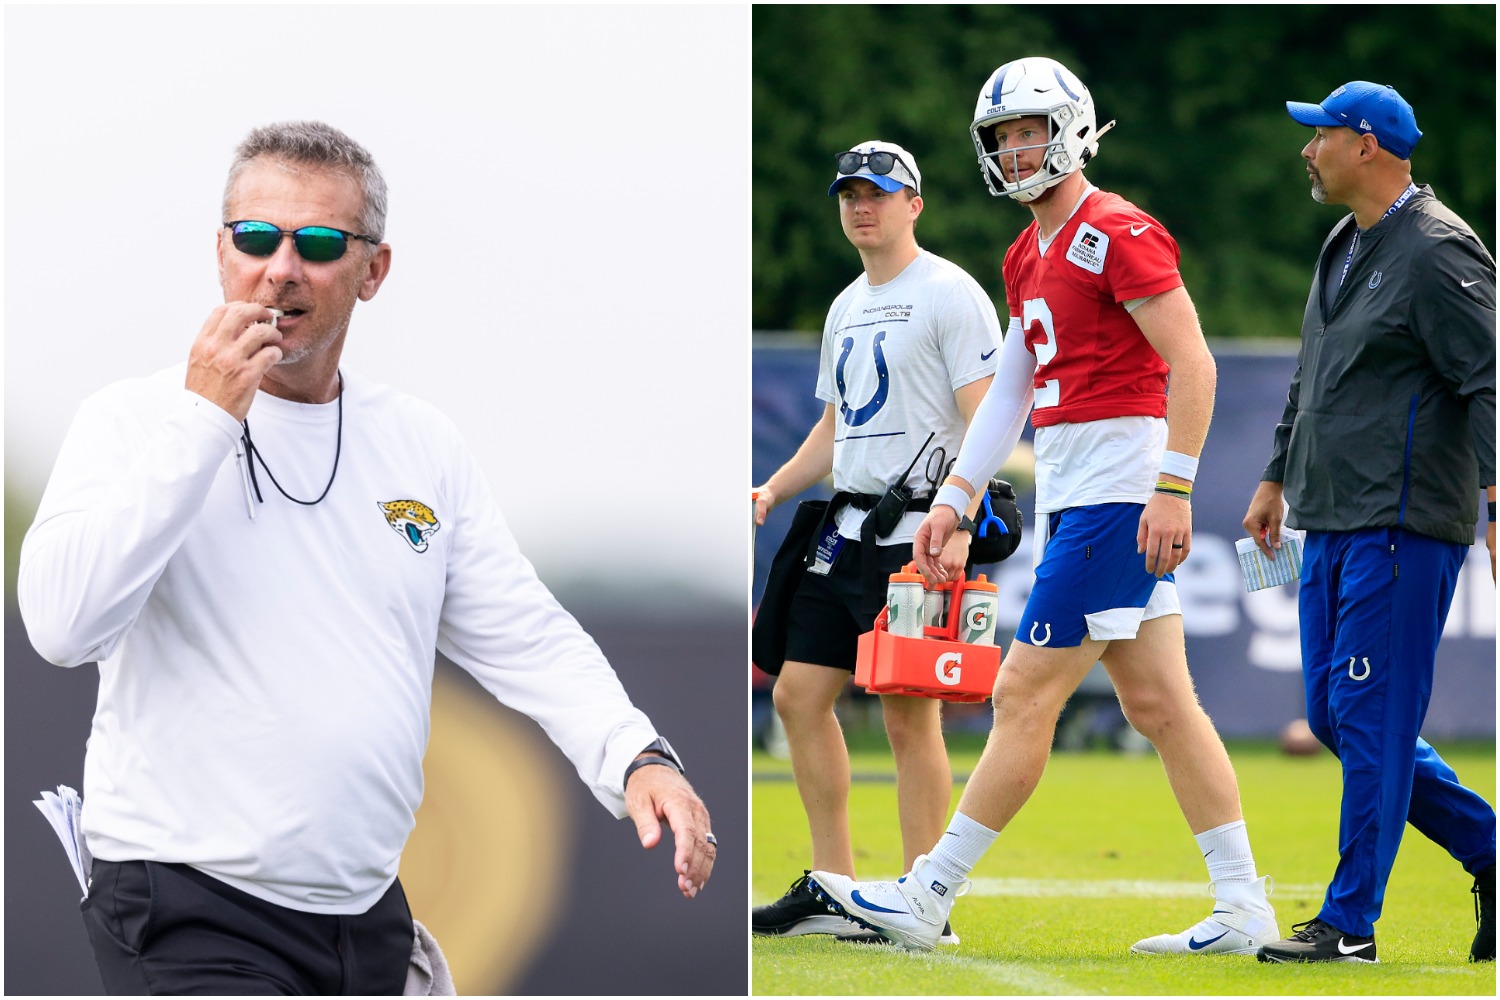 Jaguars head coach Urban Meyer blows his whistle during training camp practice as Indianapolis Colts quarterback Carson Wentz walks off the field.